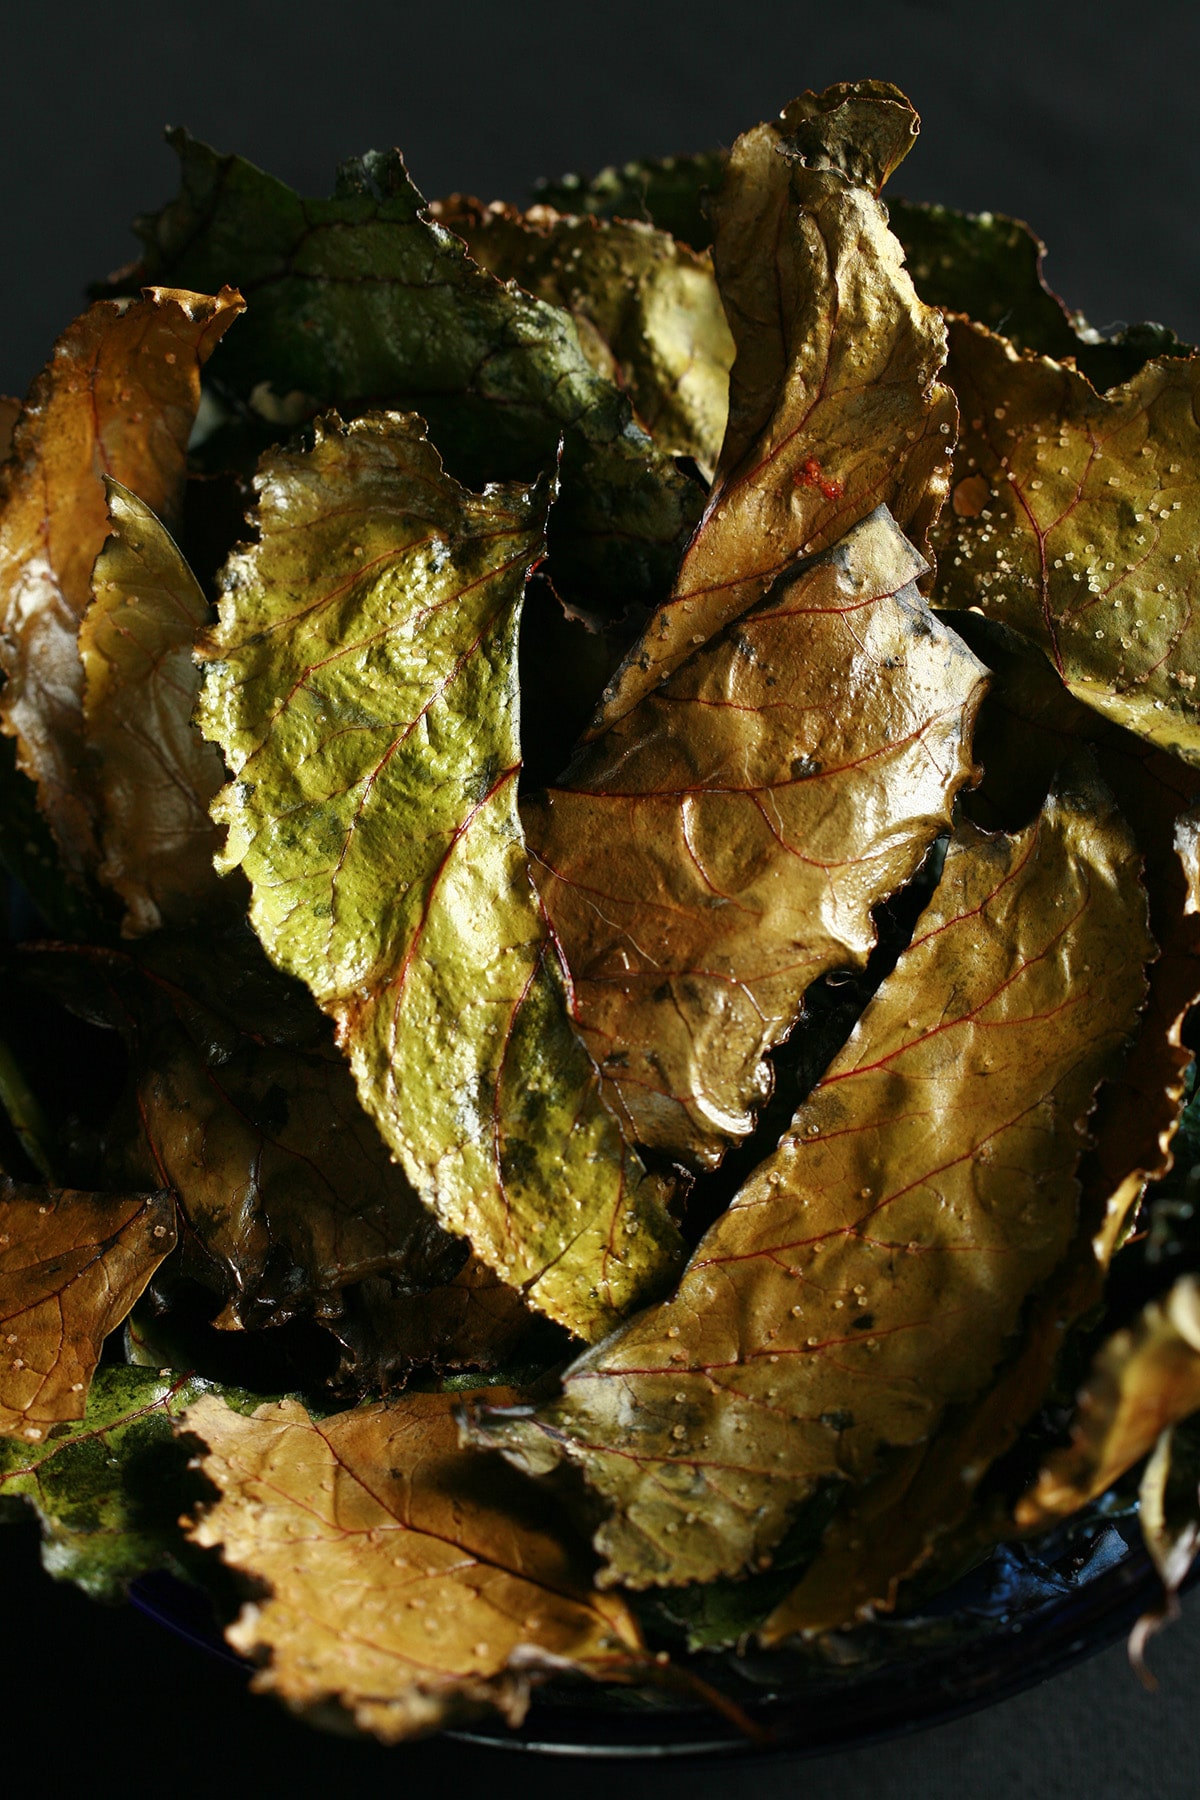 A bowl of roasted beet green chips - deep shades of greens and browns, with beautiful red veining.